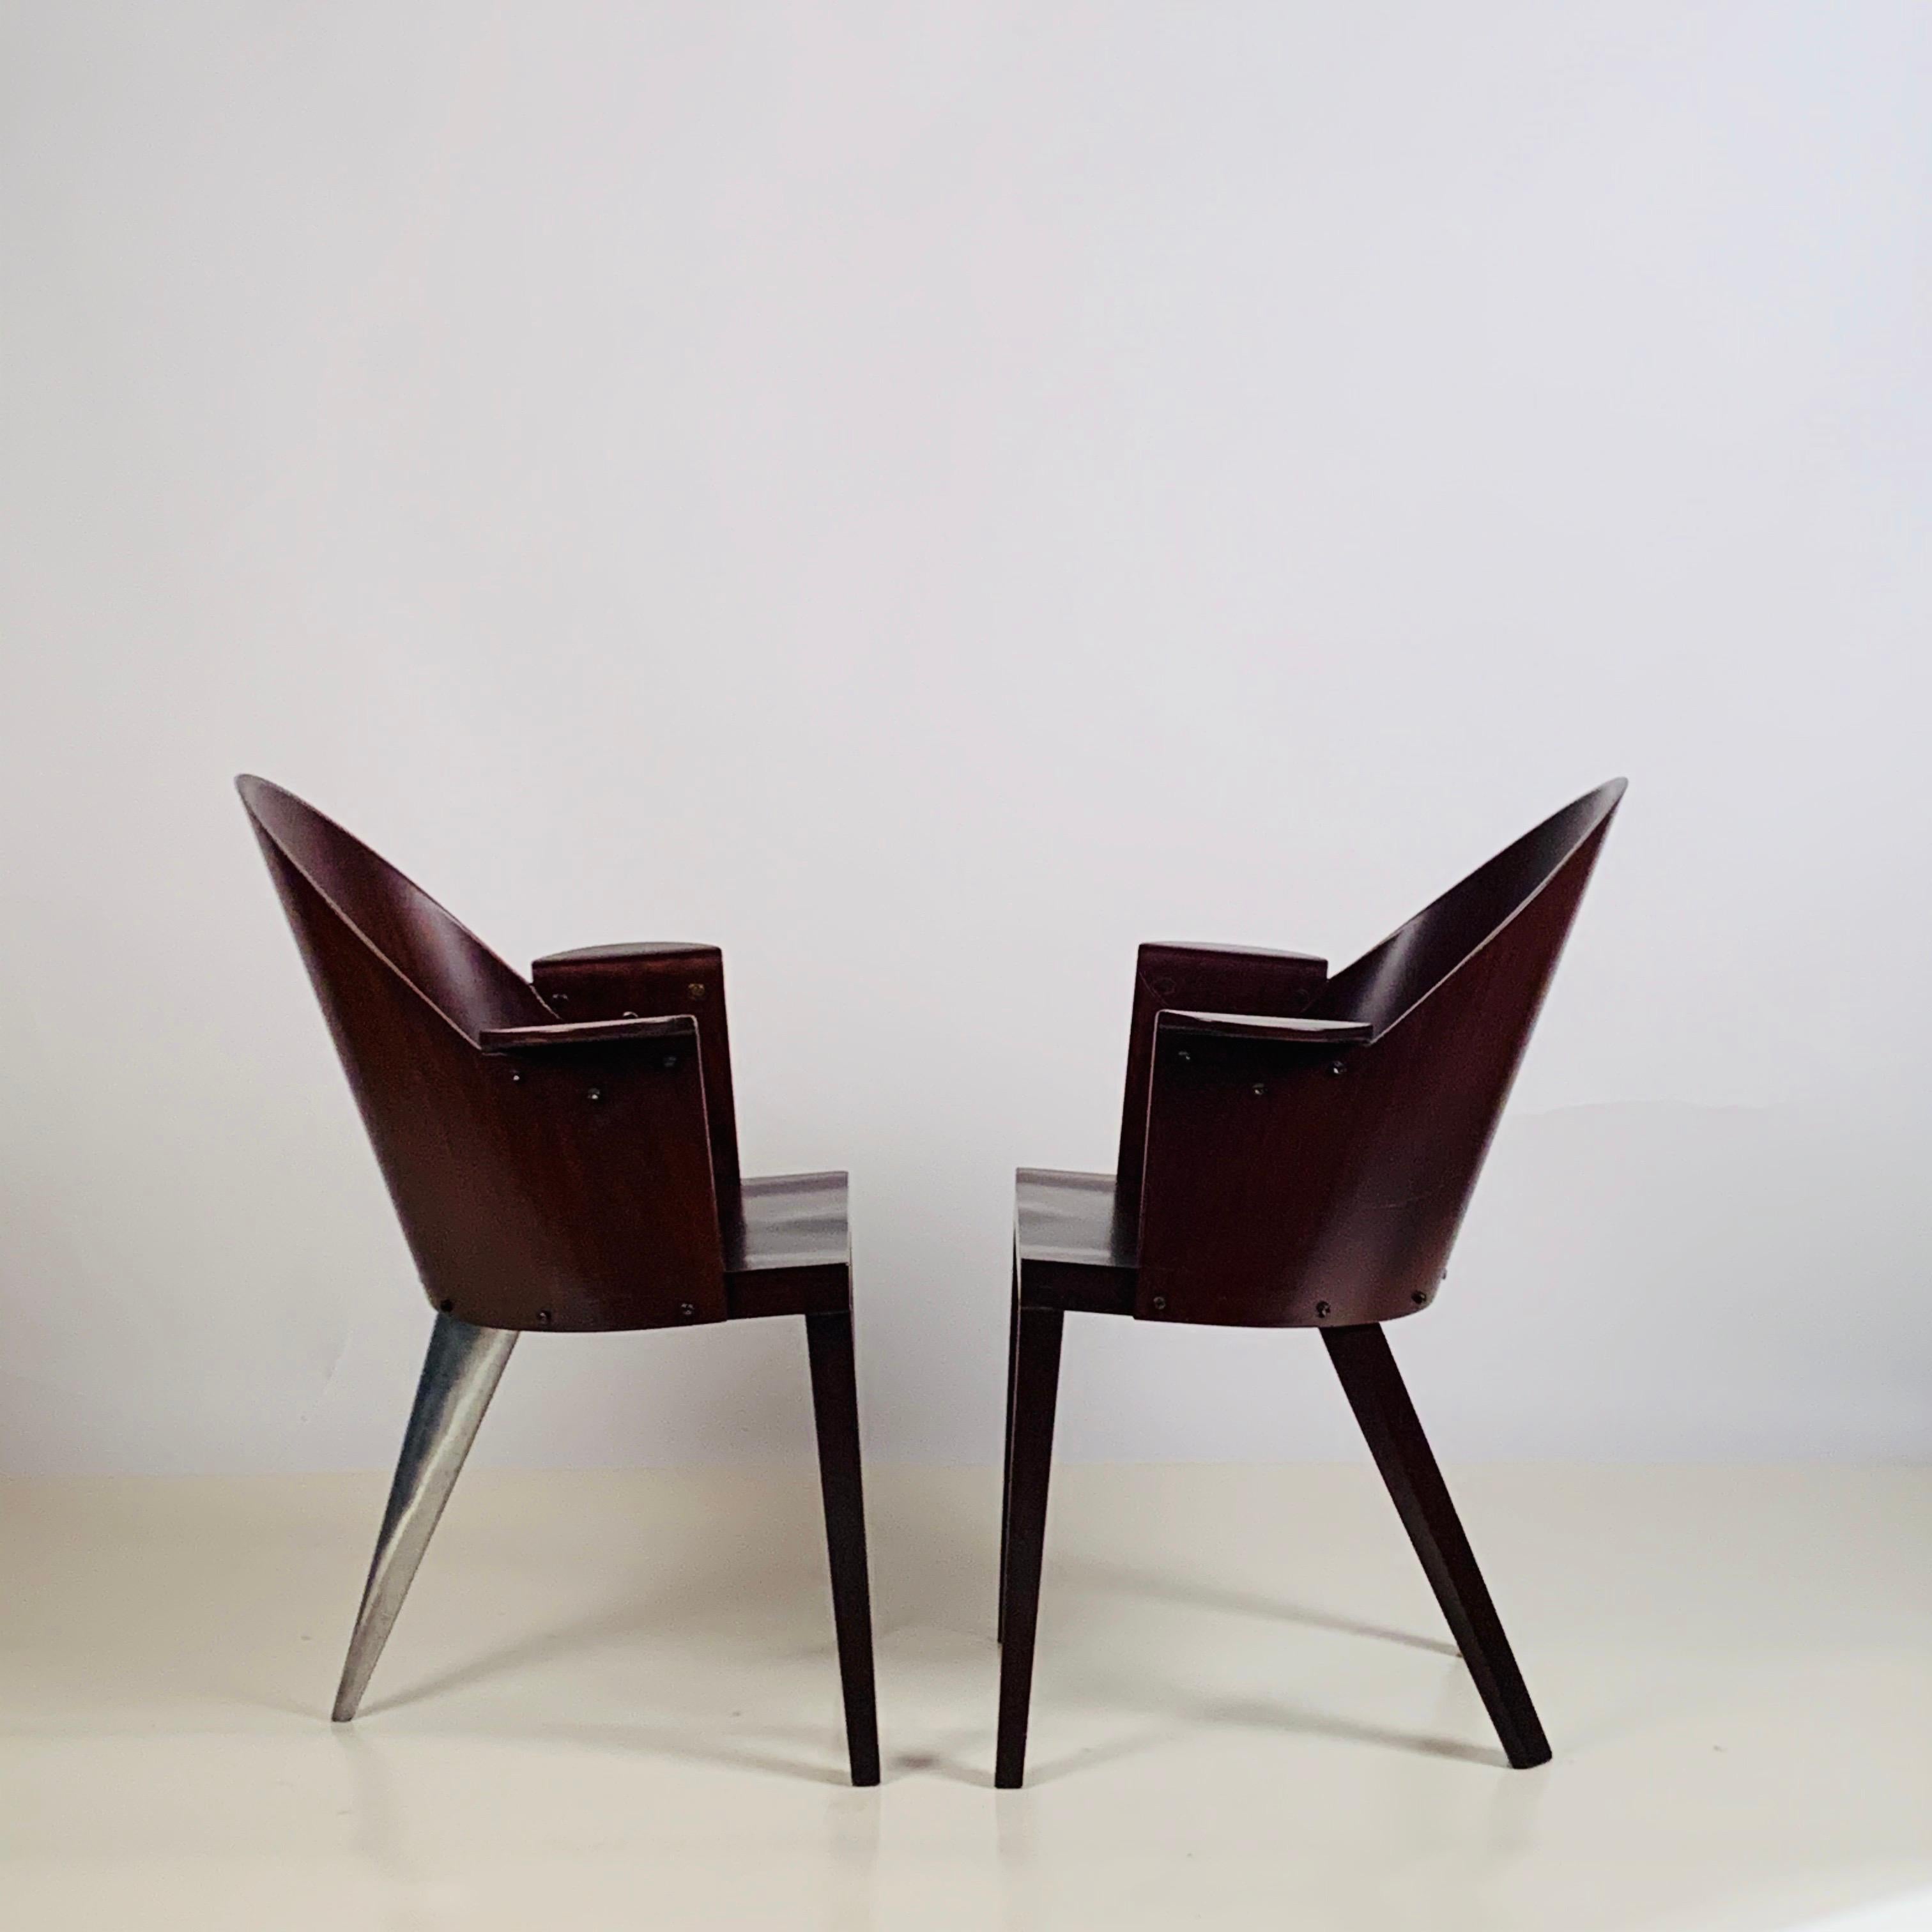 Rare pair of Philippe Starck armchairs from the Royalton Hotel, NYC. Original label. Royalton Hotel is located just east of Times Square in Manhattan at 44 West 44th Street. It was the first hotel designed by Philippe Starck and reopened on October